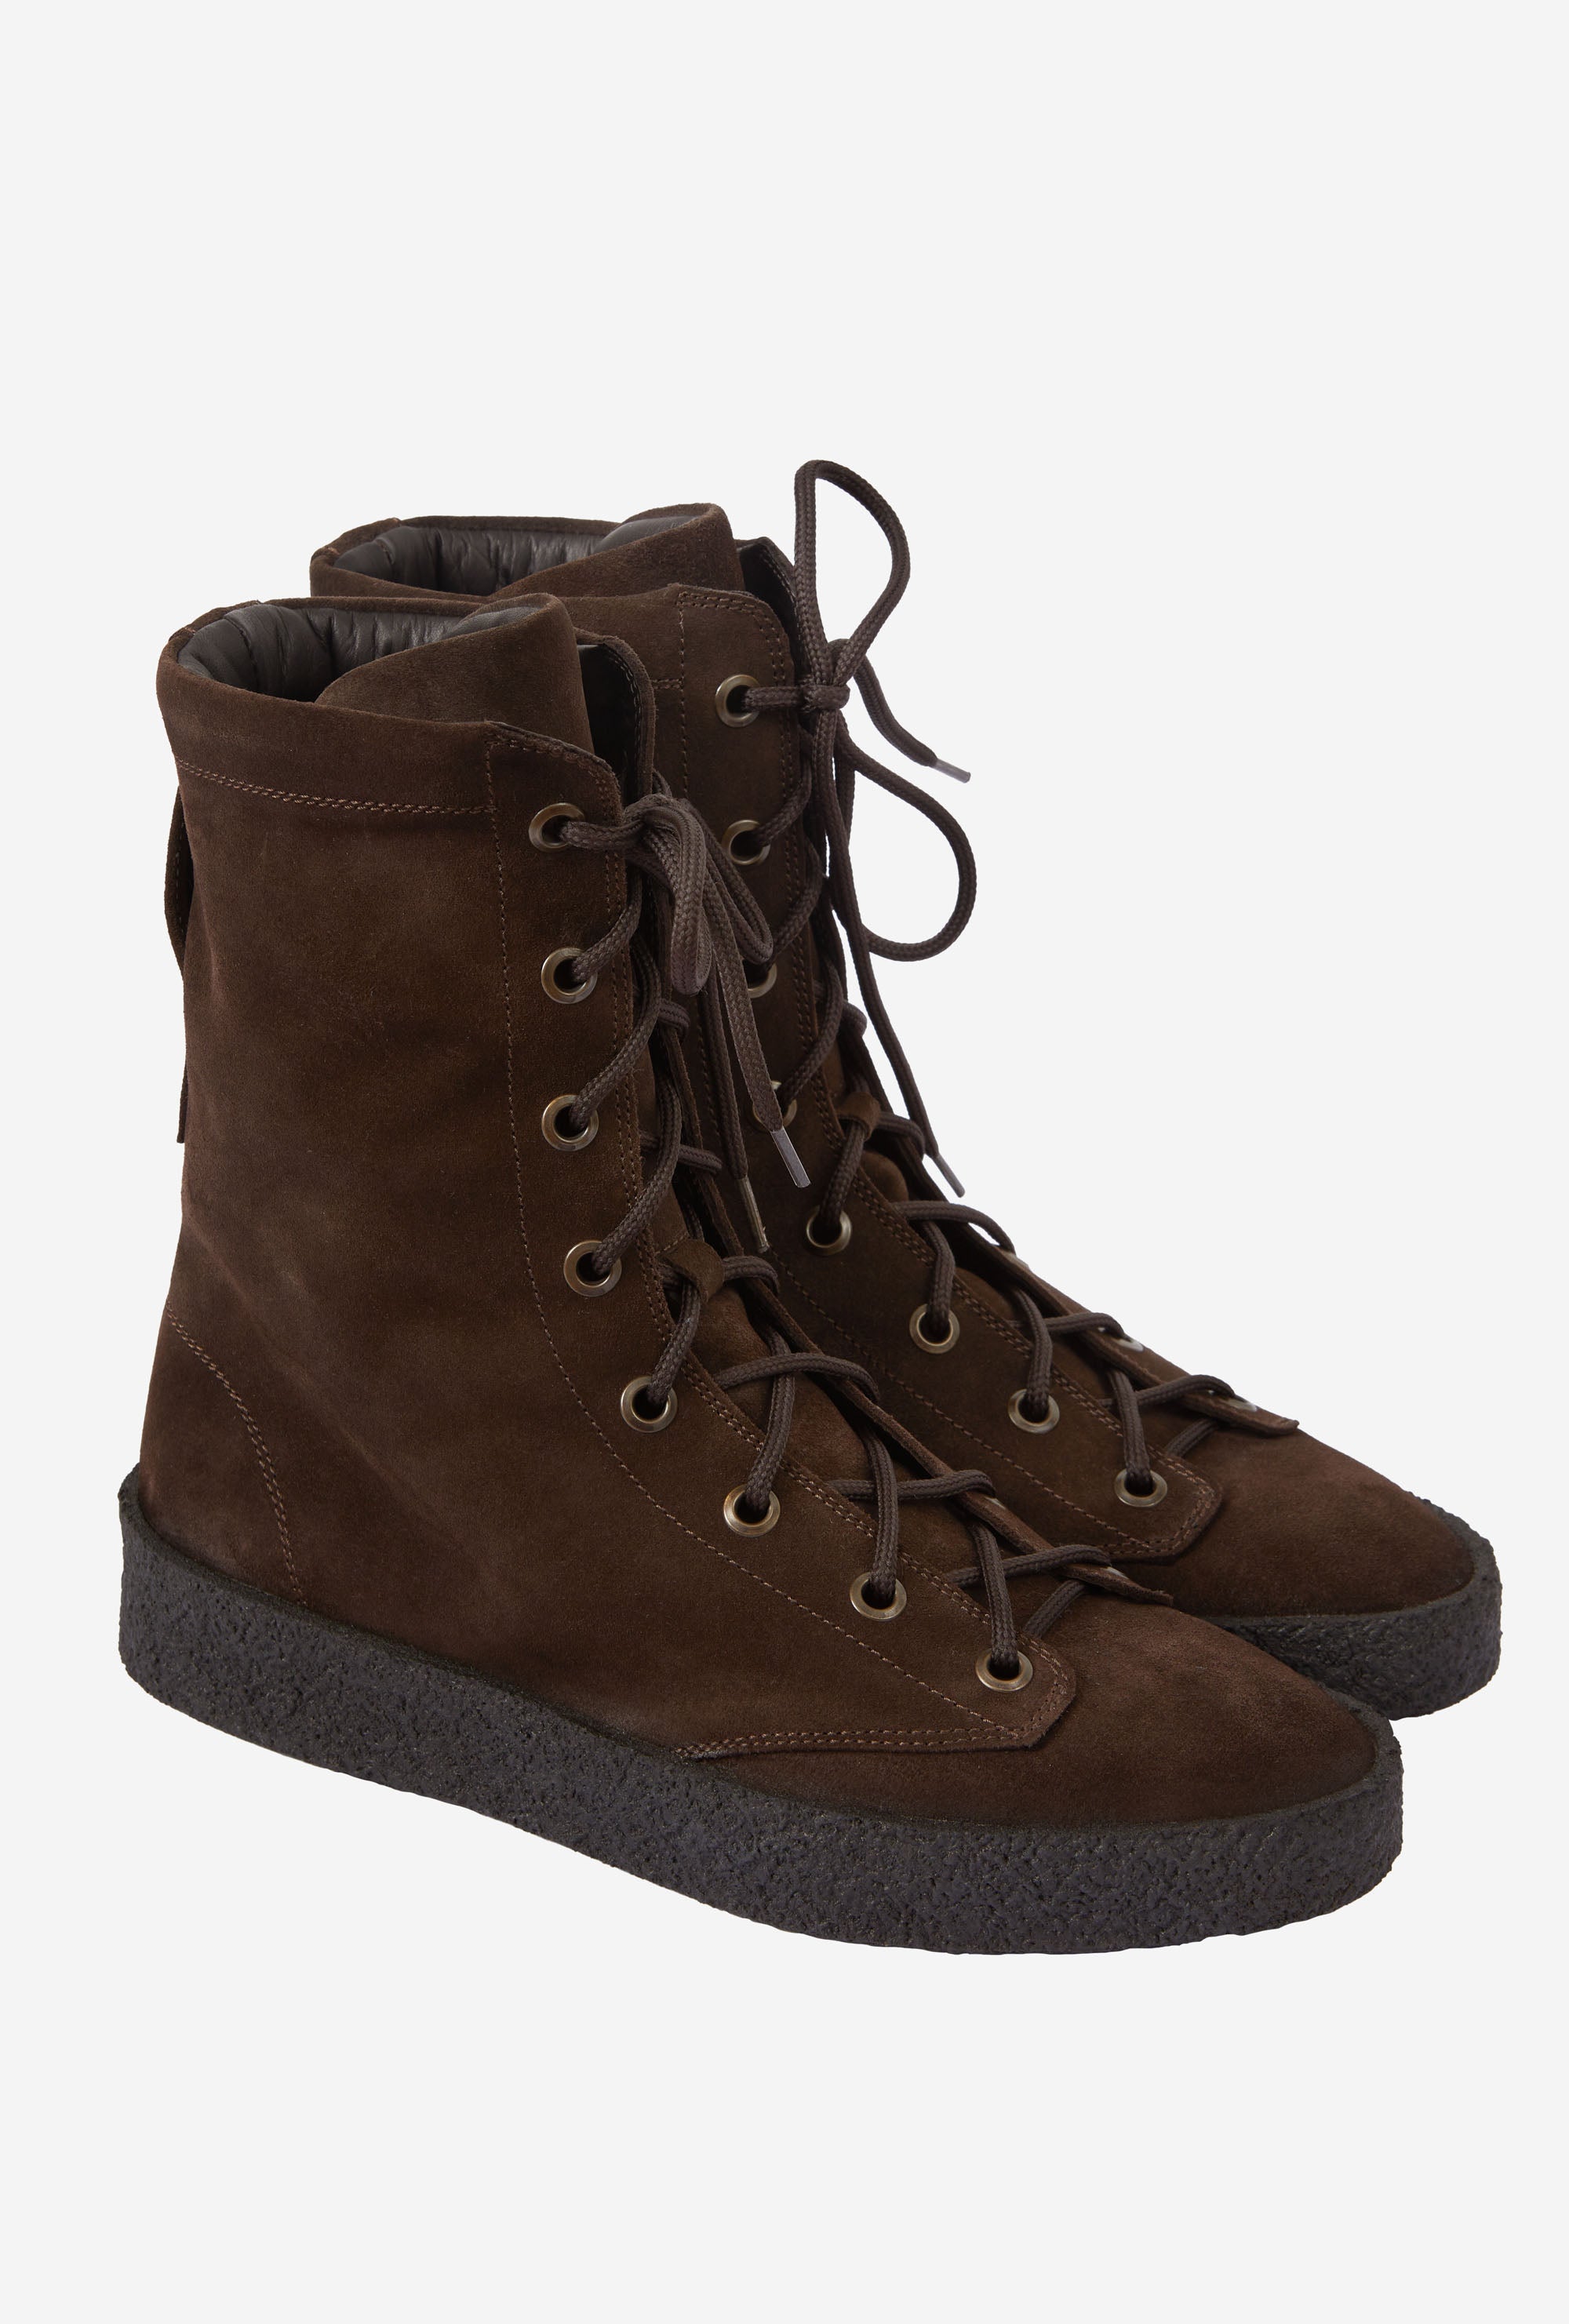 Mountain Boot Crepe Sole Dark Brown Suede